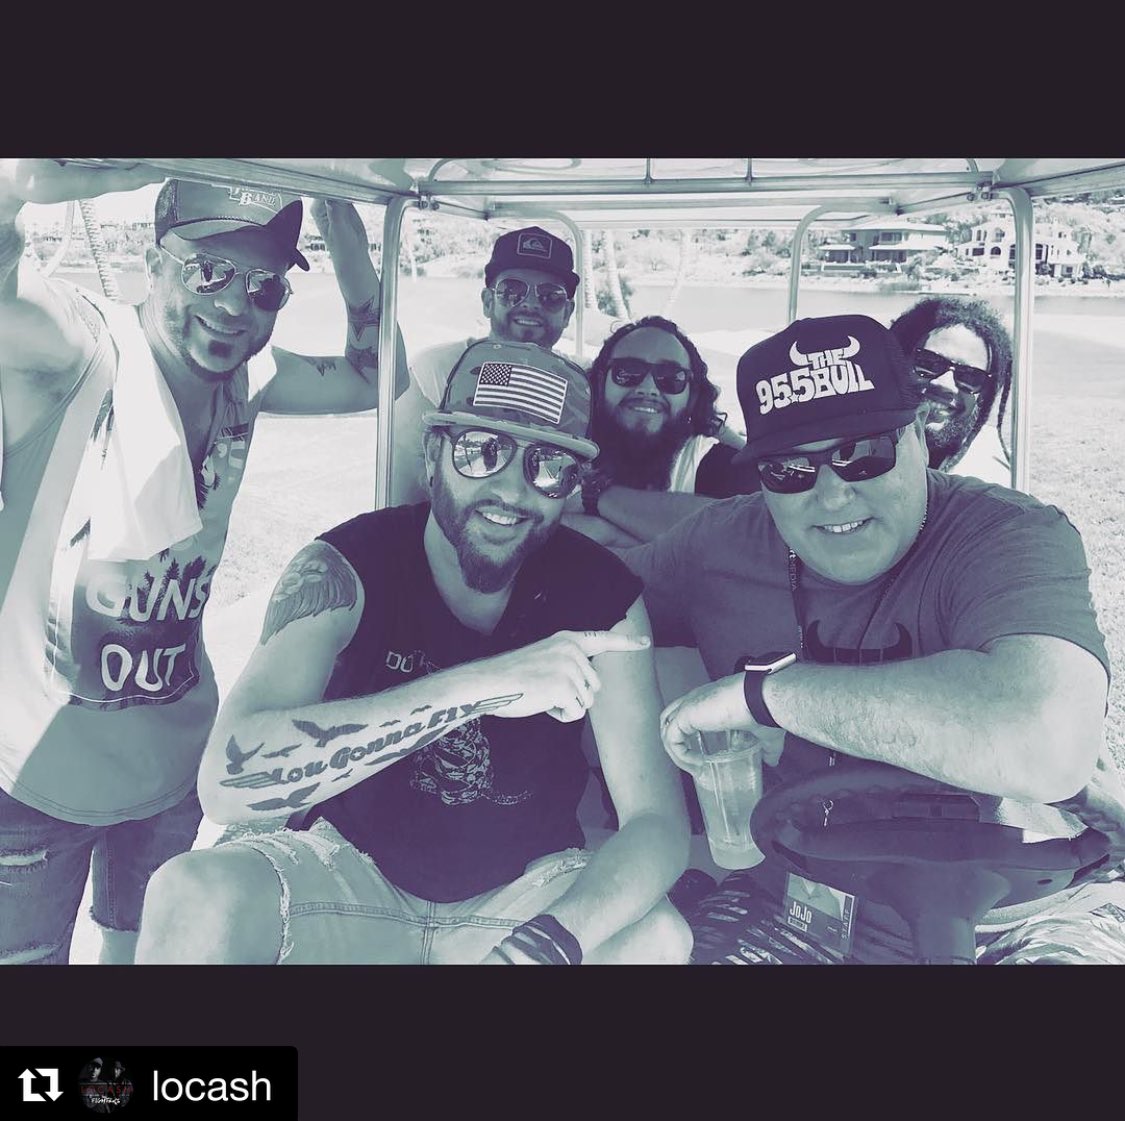 @LOCASHmusic is at #CountryInTheCove! #ilovethislife #955thebull